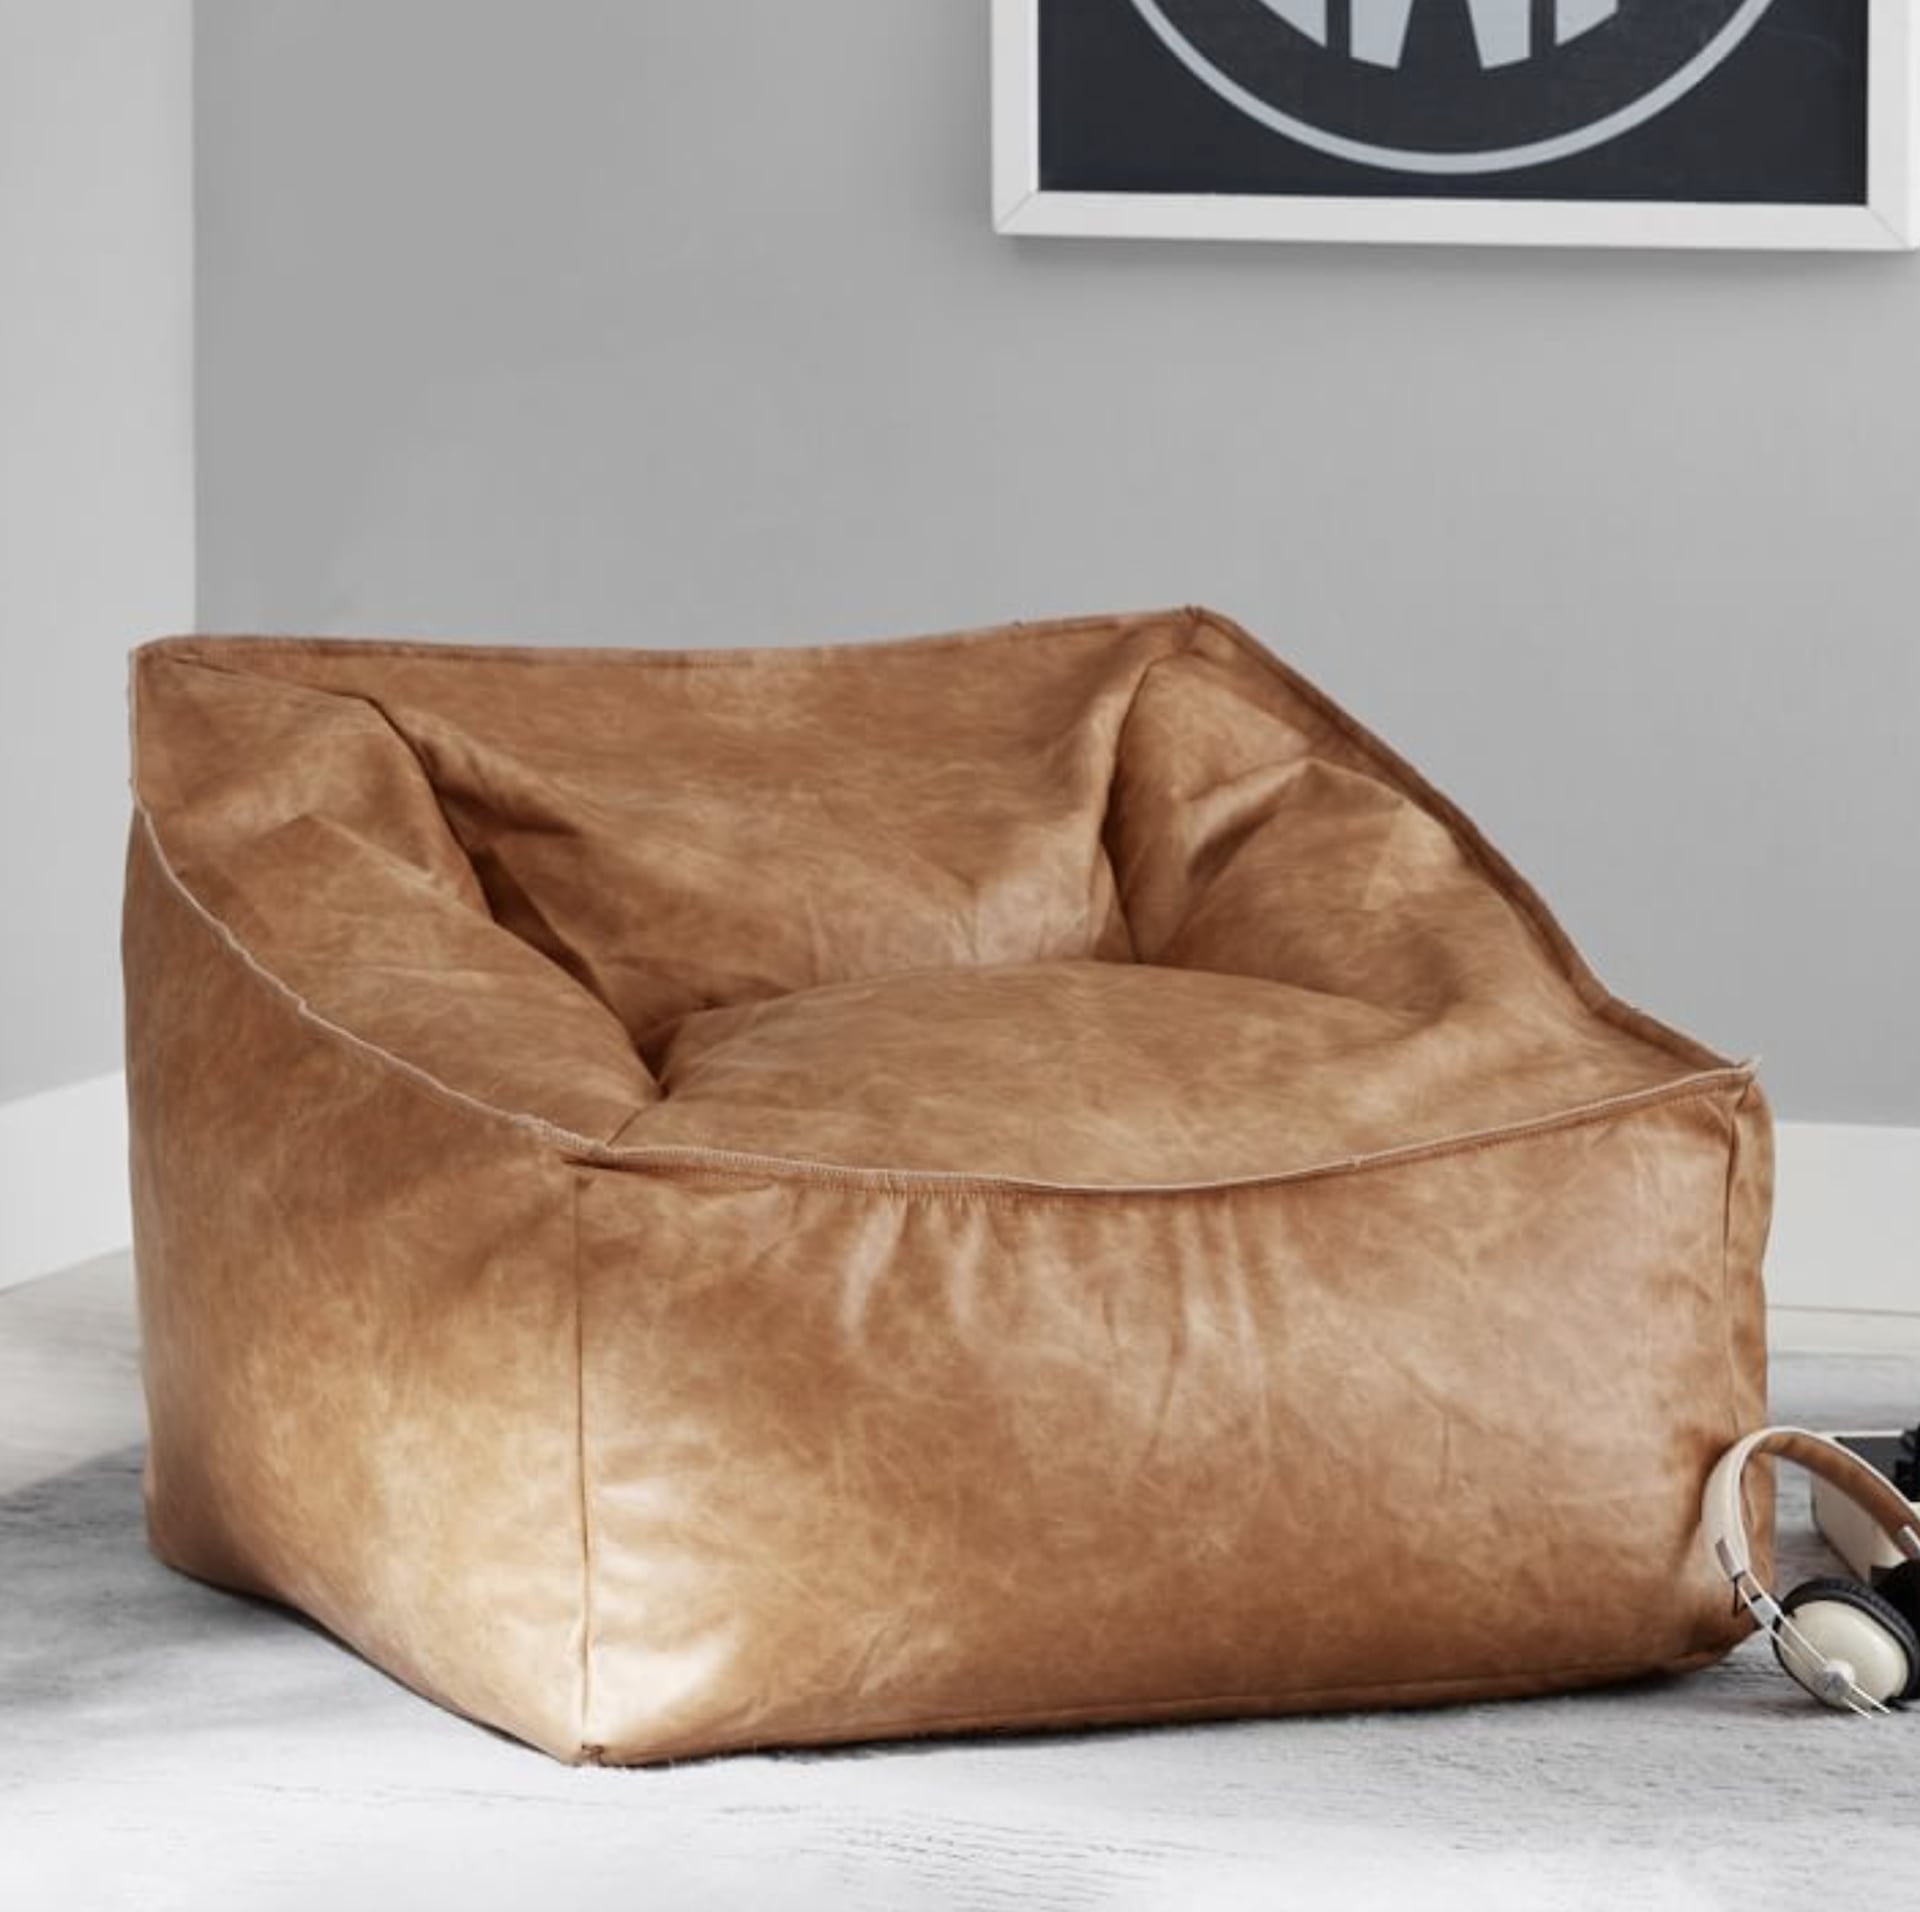 Best Beanbag Chairs For Adults